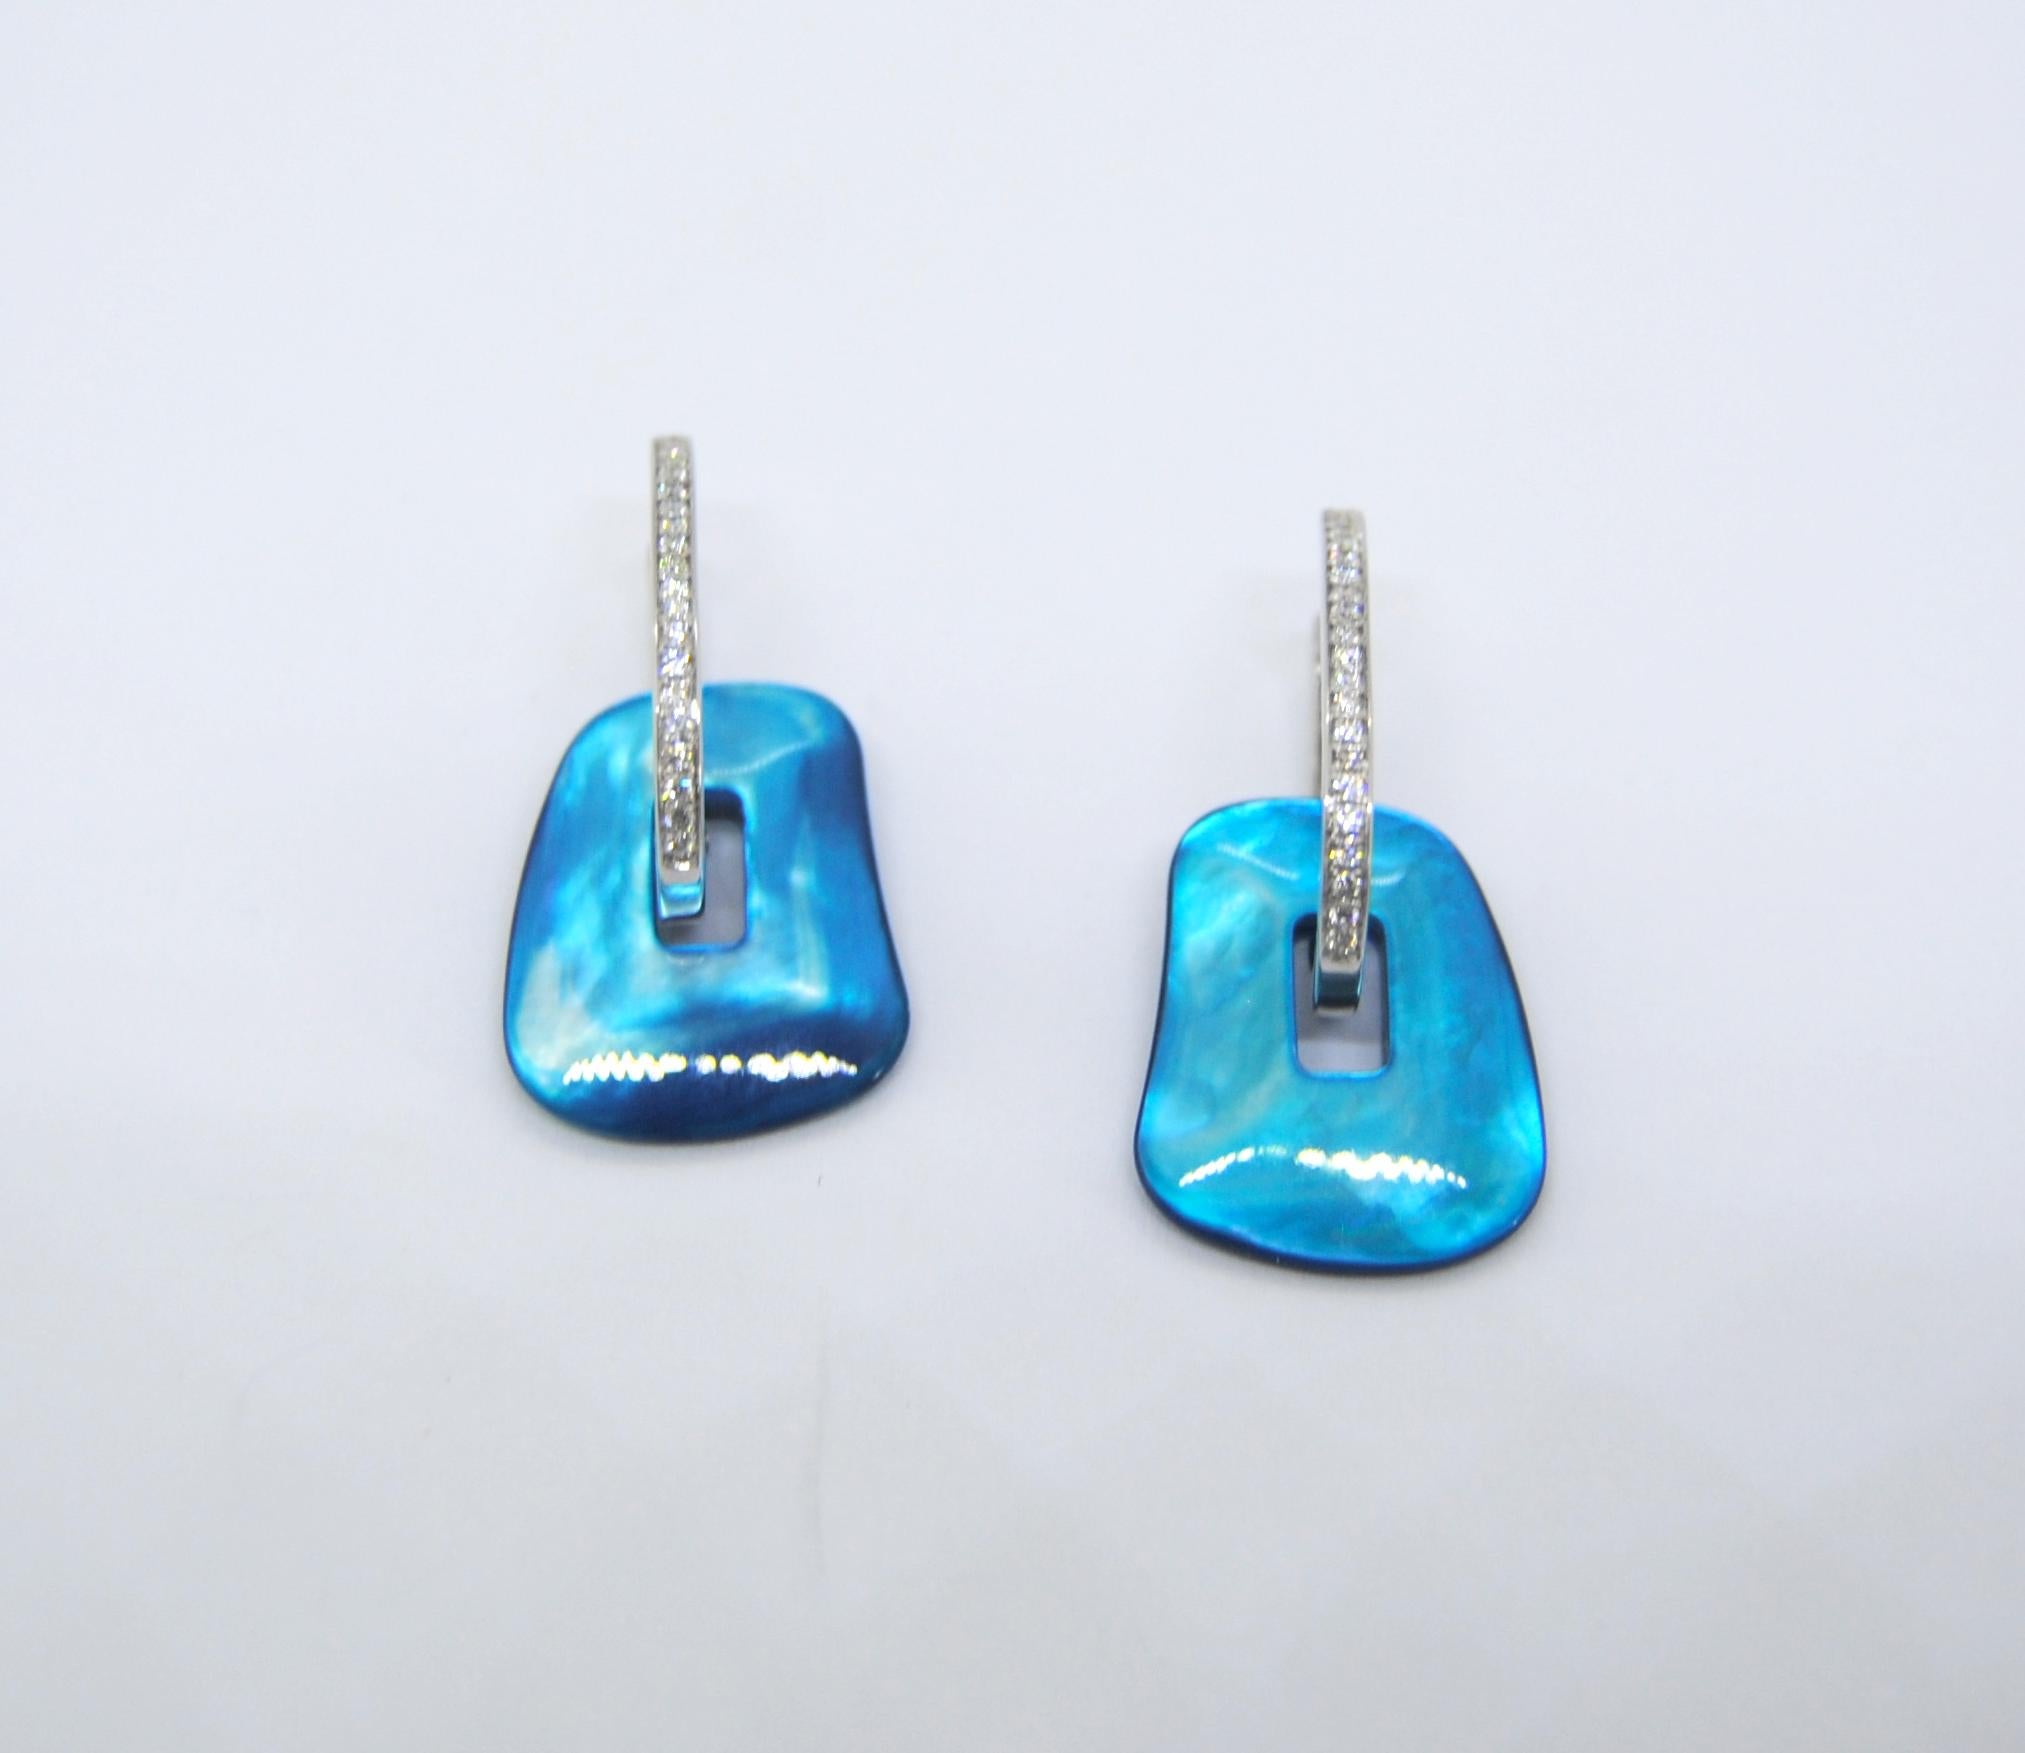 Contemporary Mattioli Puzzle Earrings 18 Karat White Gold with Diamonds and 11 Color Pendants